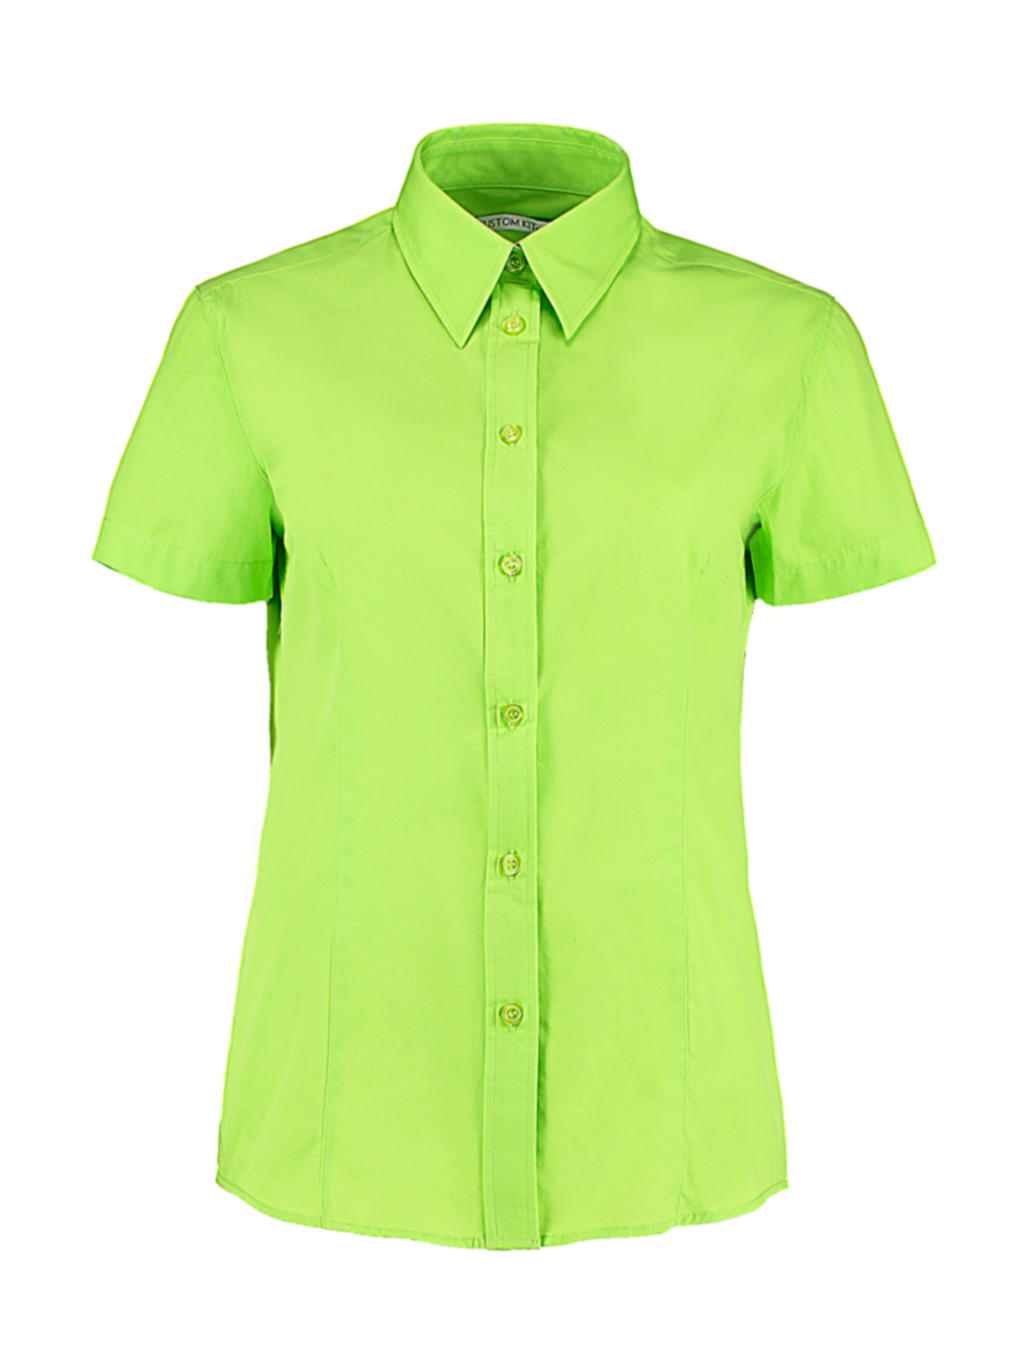  Womens Classic Fit Workforce Shirt in Farbe Lime